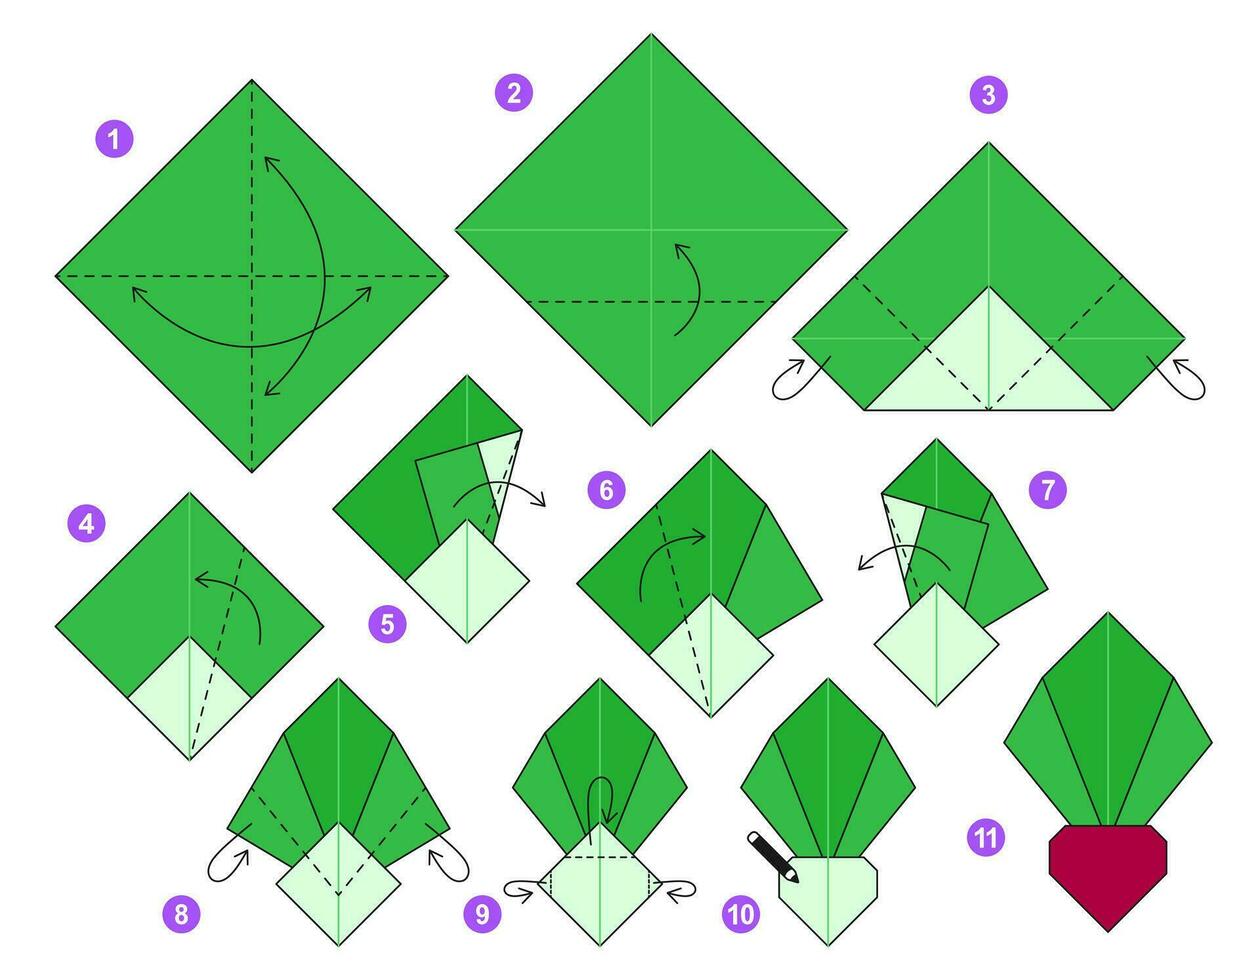 Radish origami scheme tutorial moving model. Origami for kids. Step by step how to make a cute origami vegetable. Vector illustration.